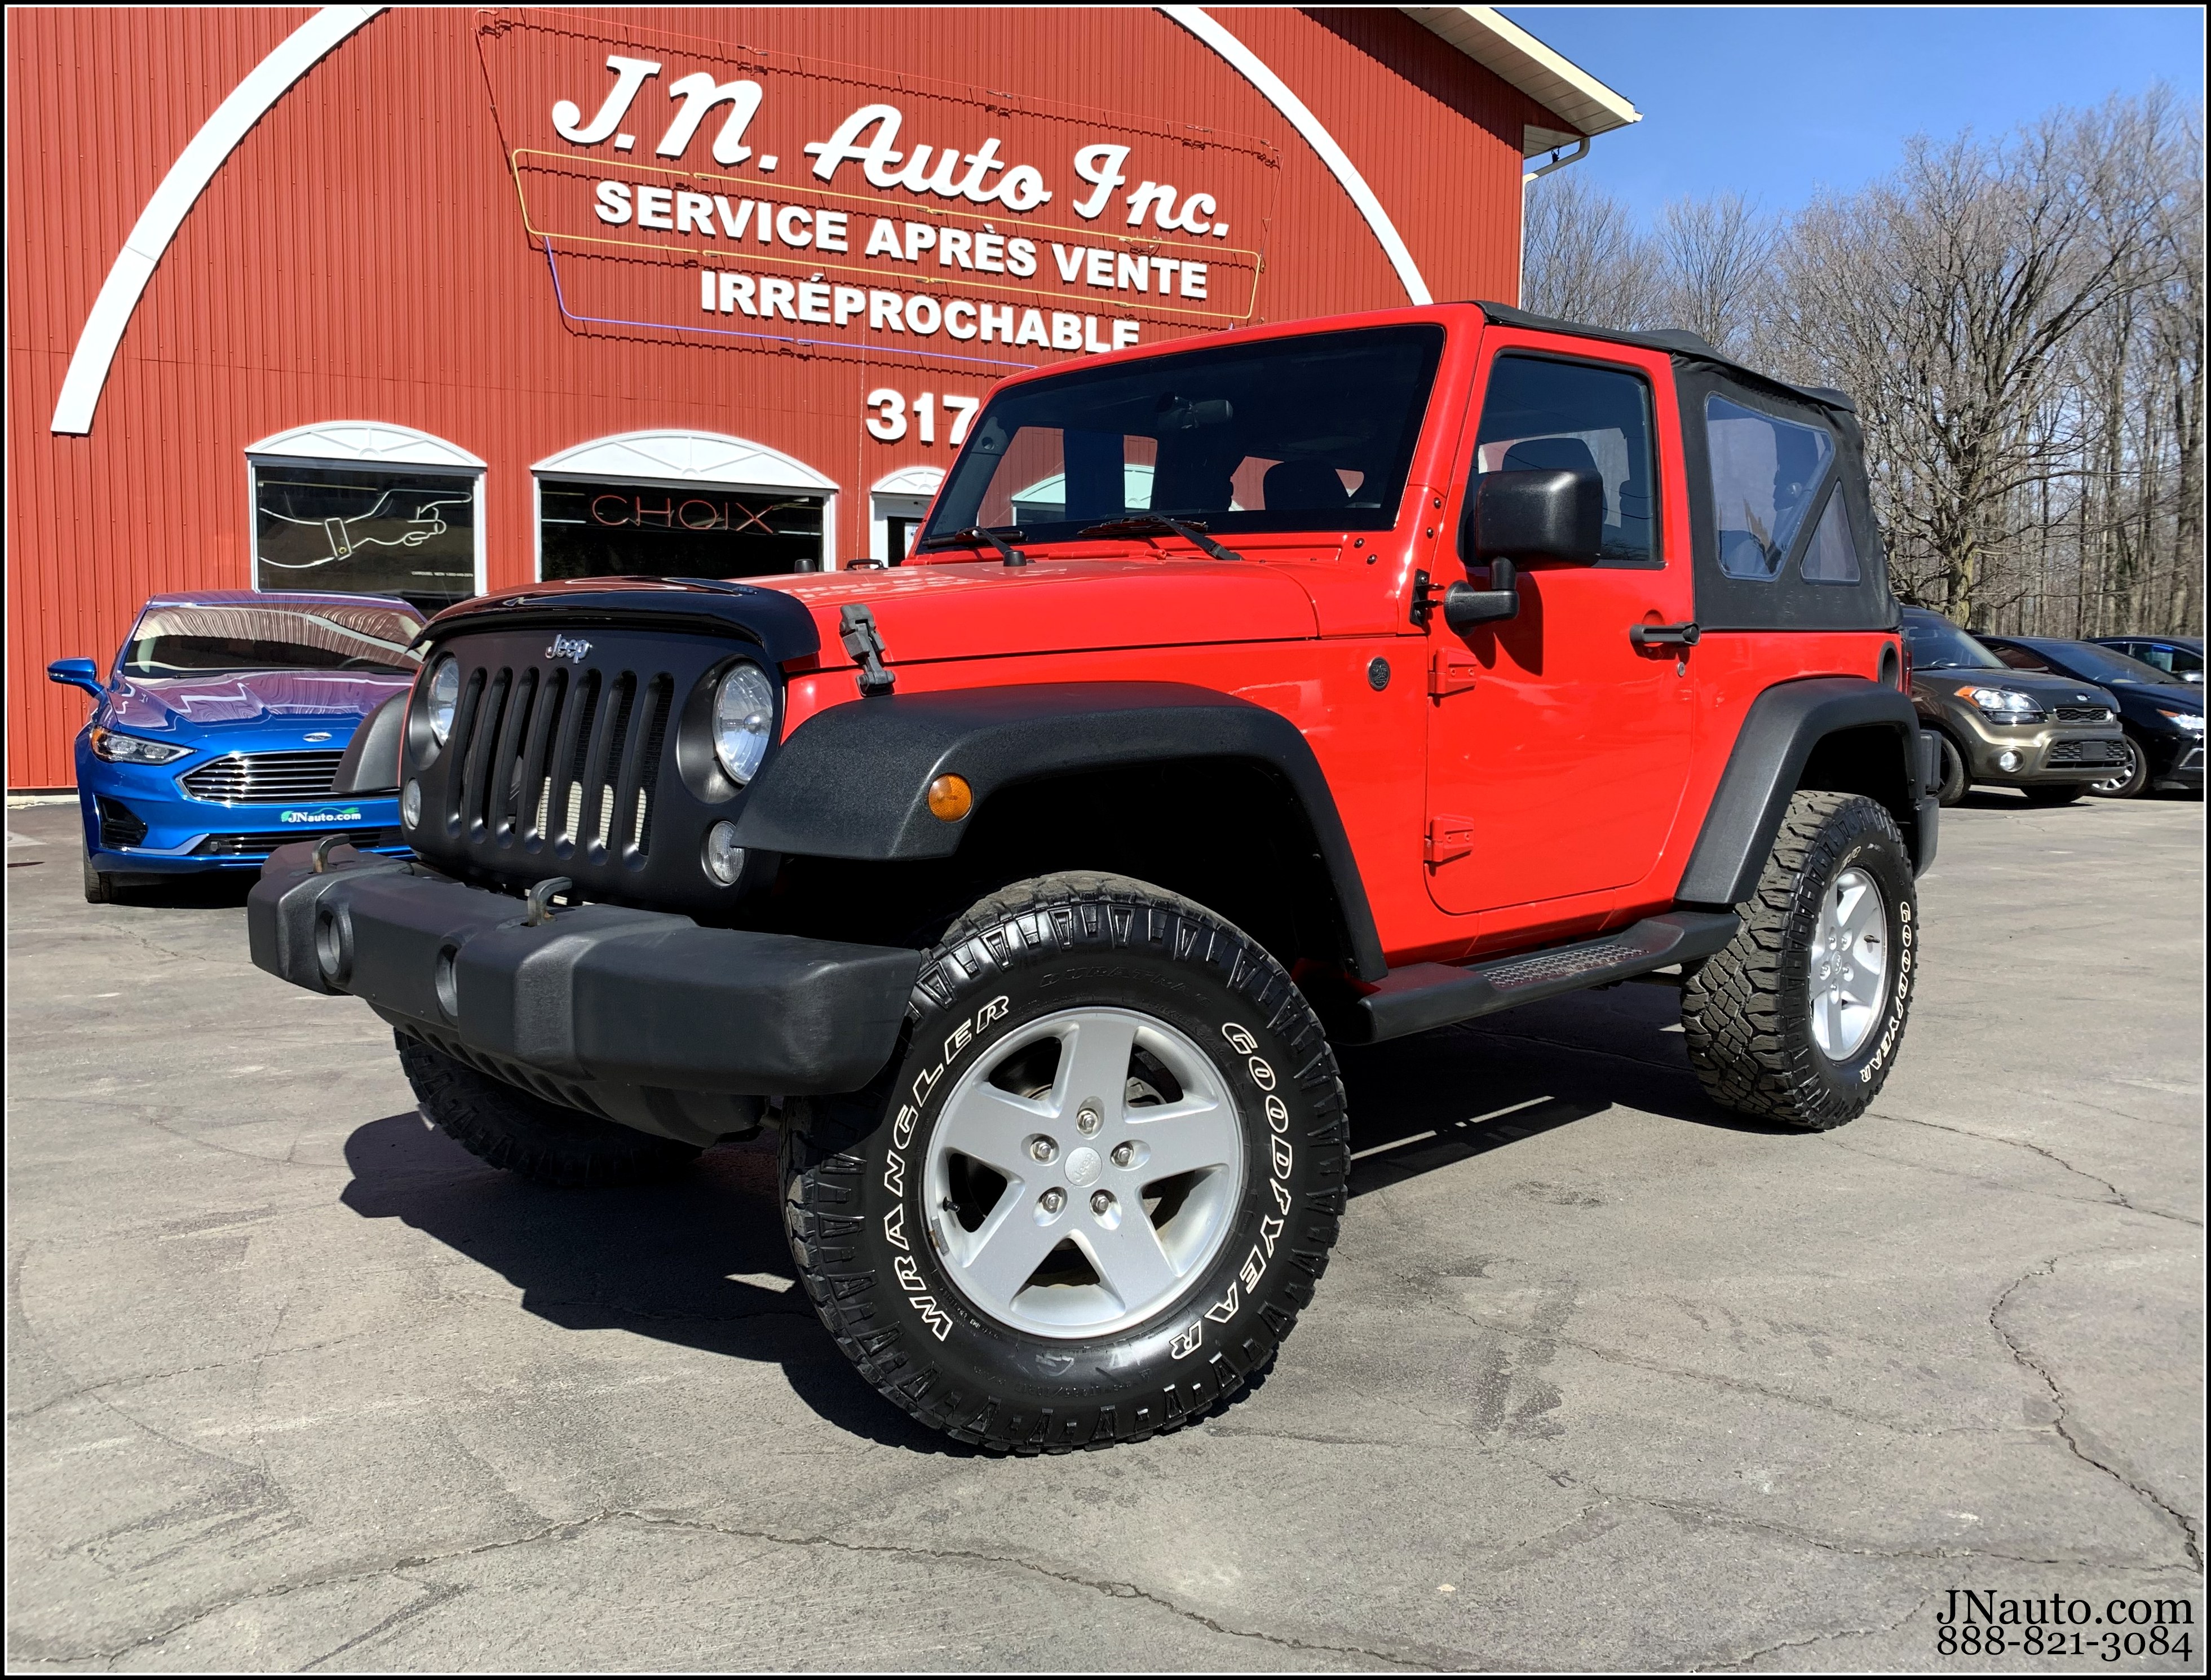 Used Jeep Wrangler vehicle for sale in Estrie, JN Auto